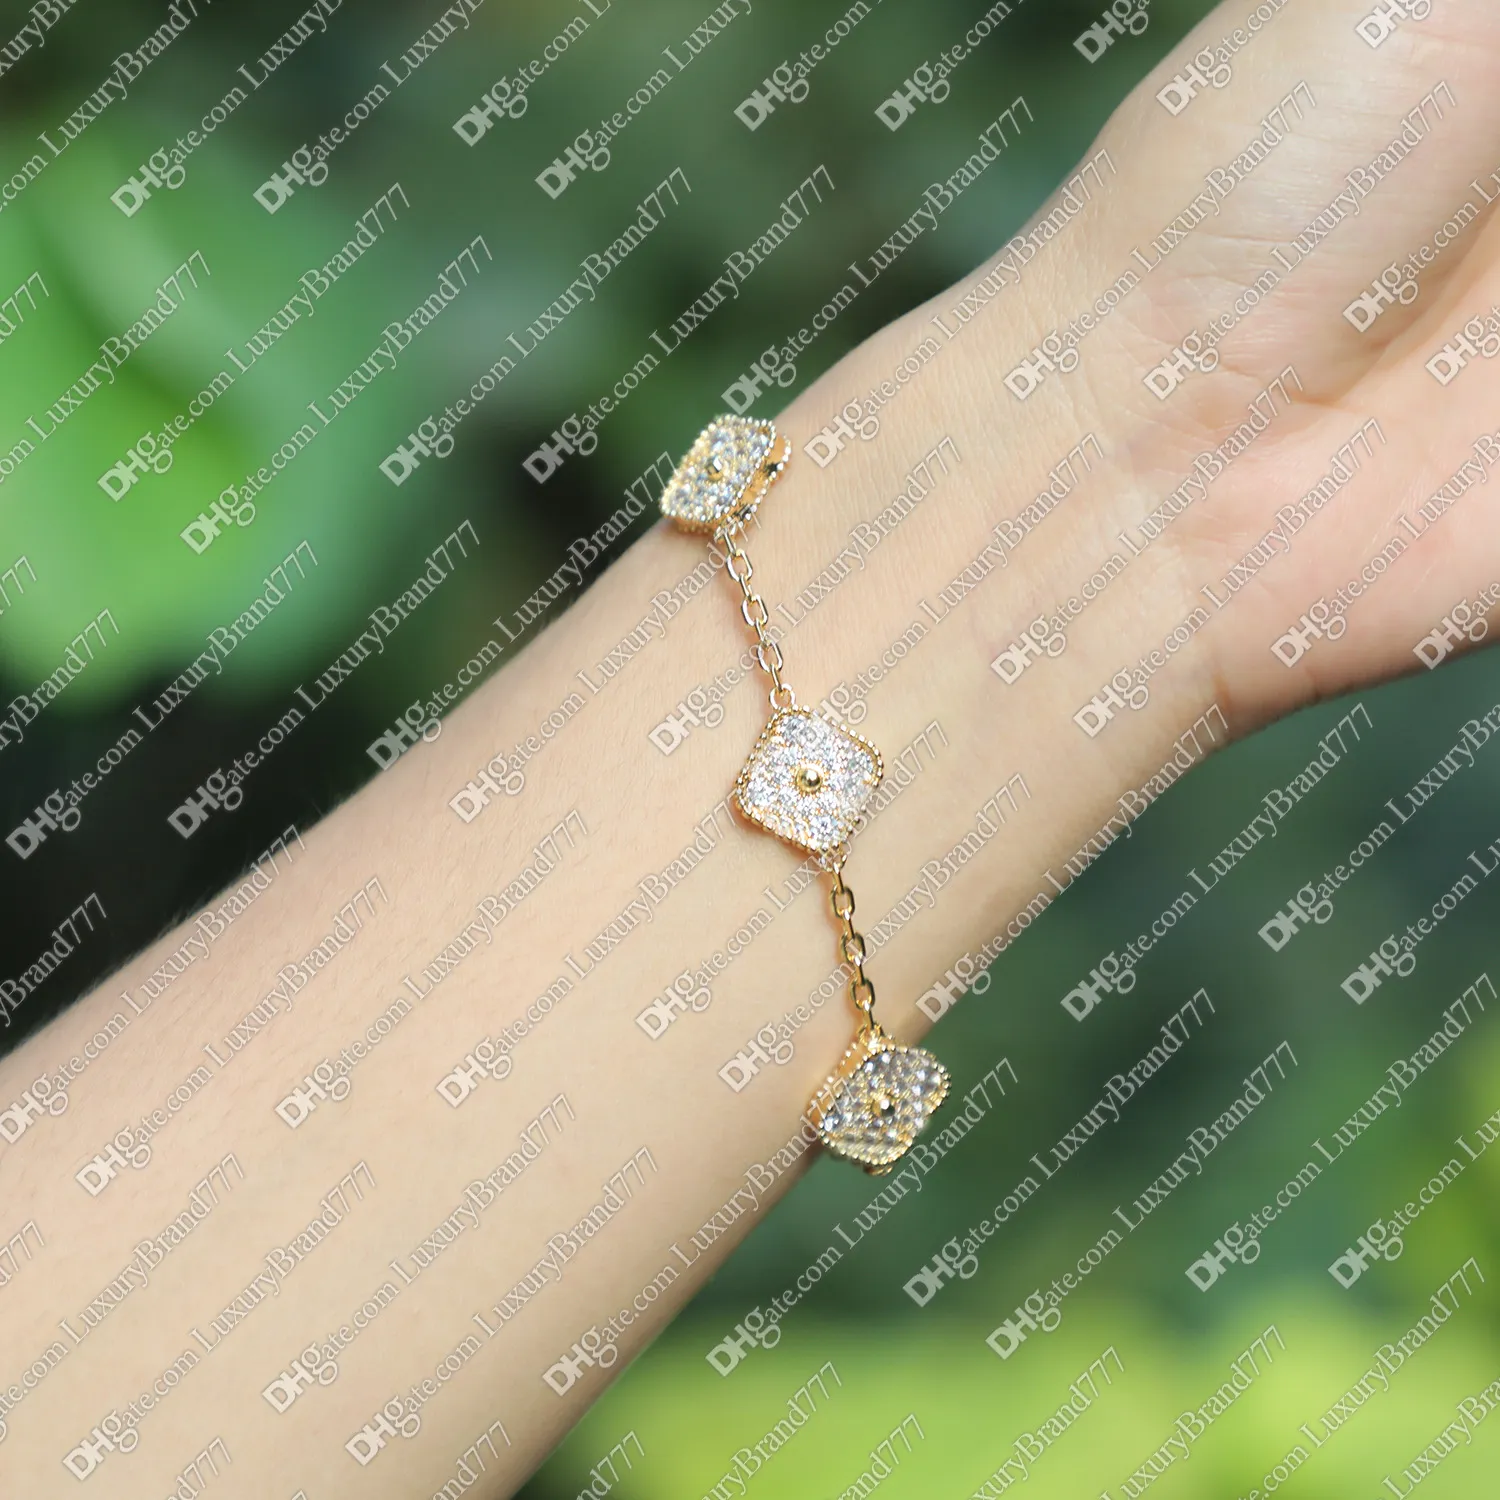 Fashion Classic Woman Bracelet 4 Four Leaf Clover Charm Jewelry Bracelet Elegant 18K Gold Agate Shell Pearl Mother and Daughter Co228S